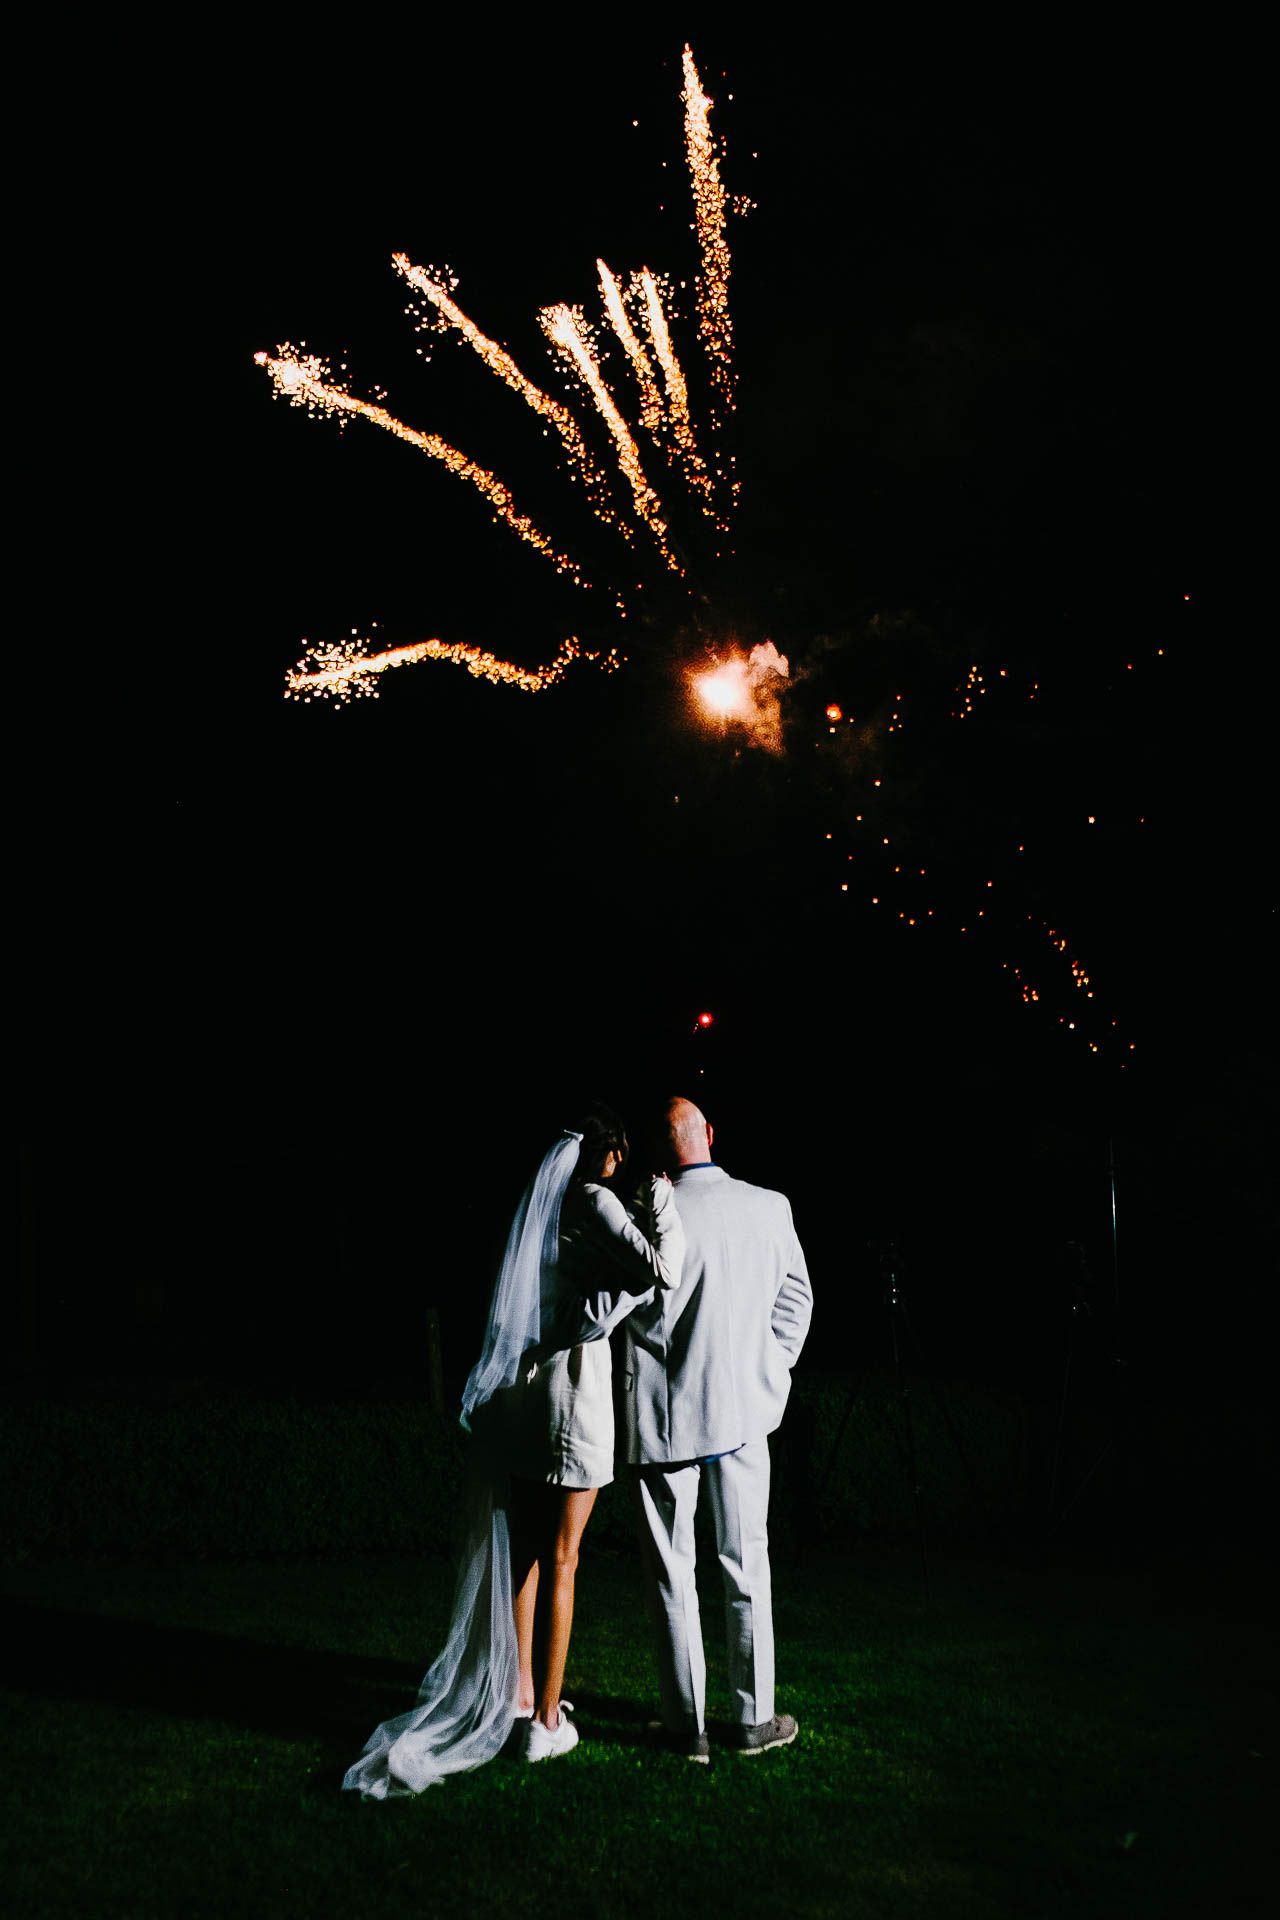 Bright sparks shoot into the night sky as Adrian and Nadia watch with their backs to the camera. Mark Cairns - a mind reader and magician entertainer for weddings and events - wowing guests with his tricks during Adrian and Nadia's wedding reception. Photo by Des Dubber Photography, videography by Veiled Productions